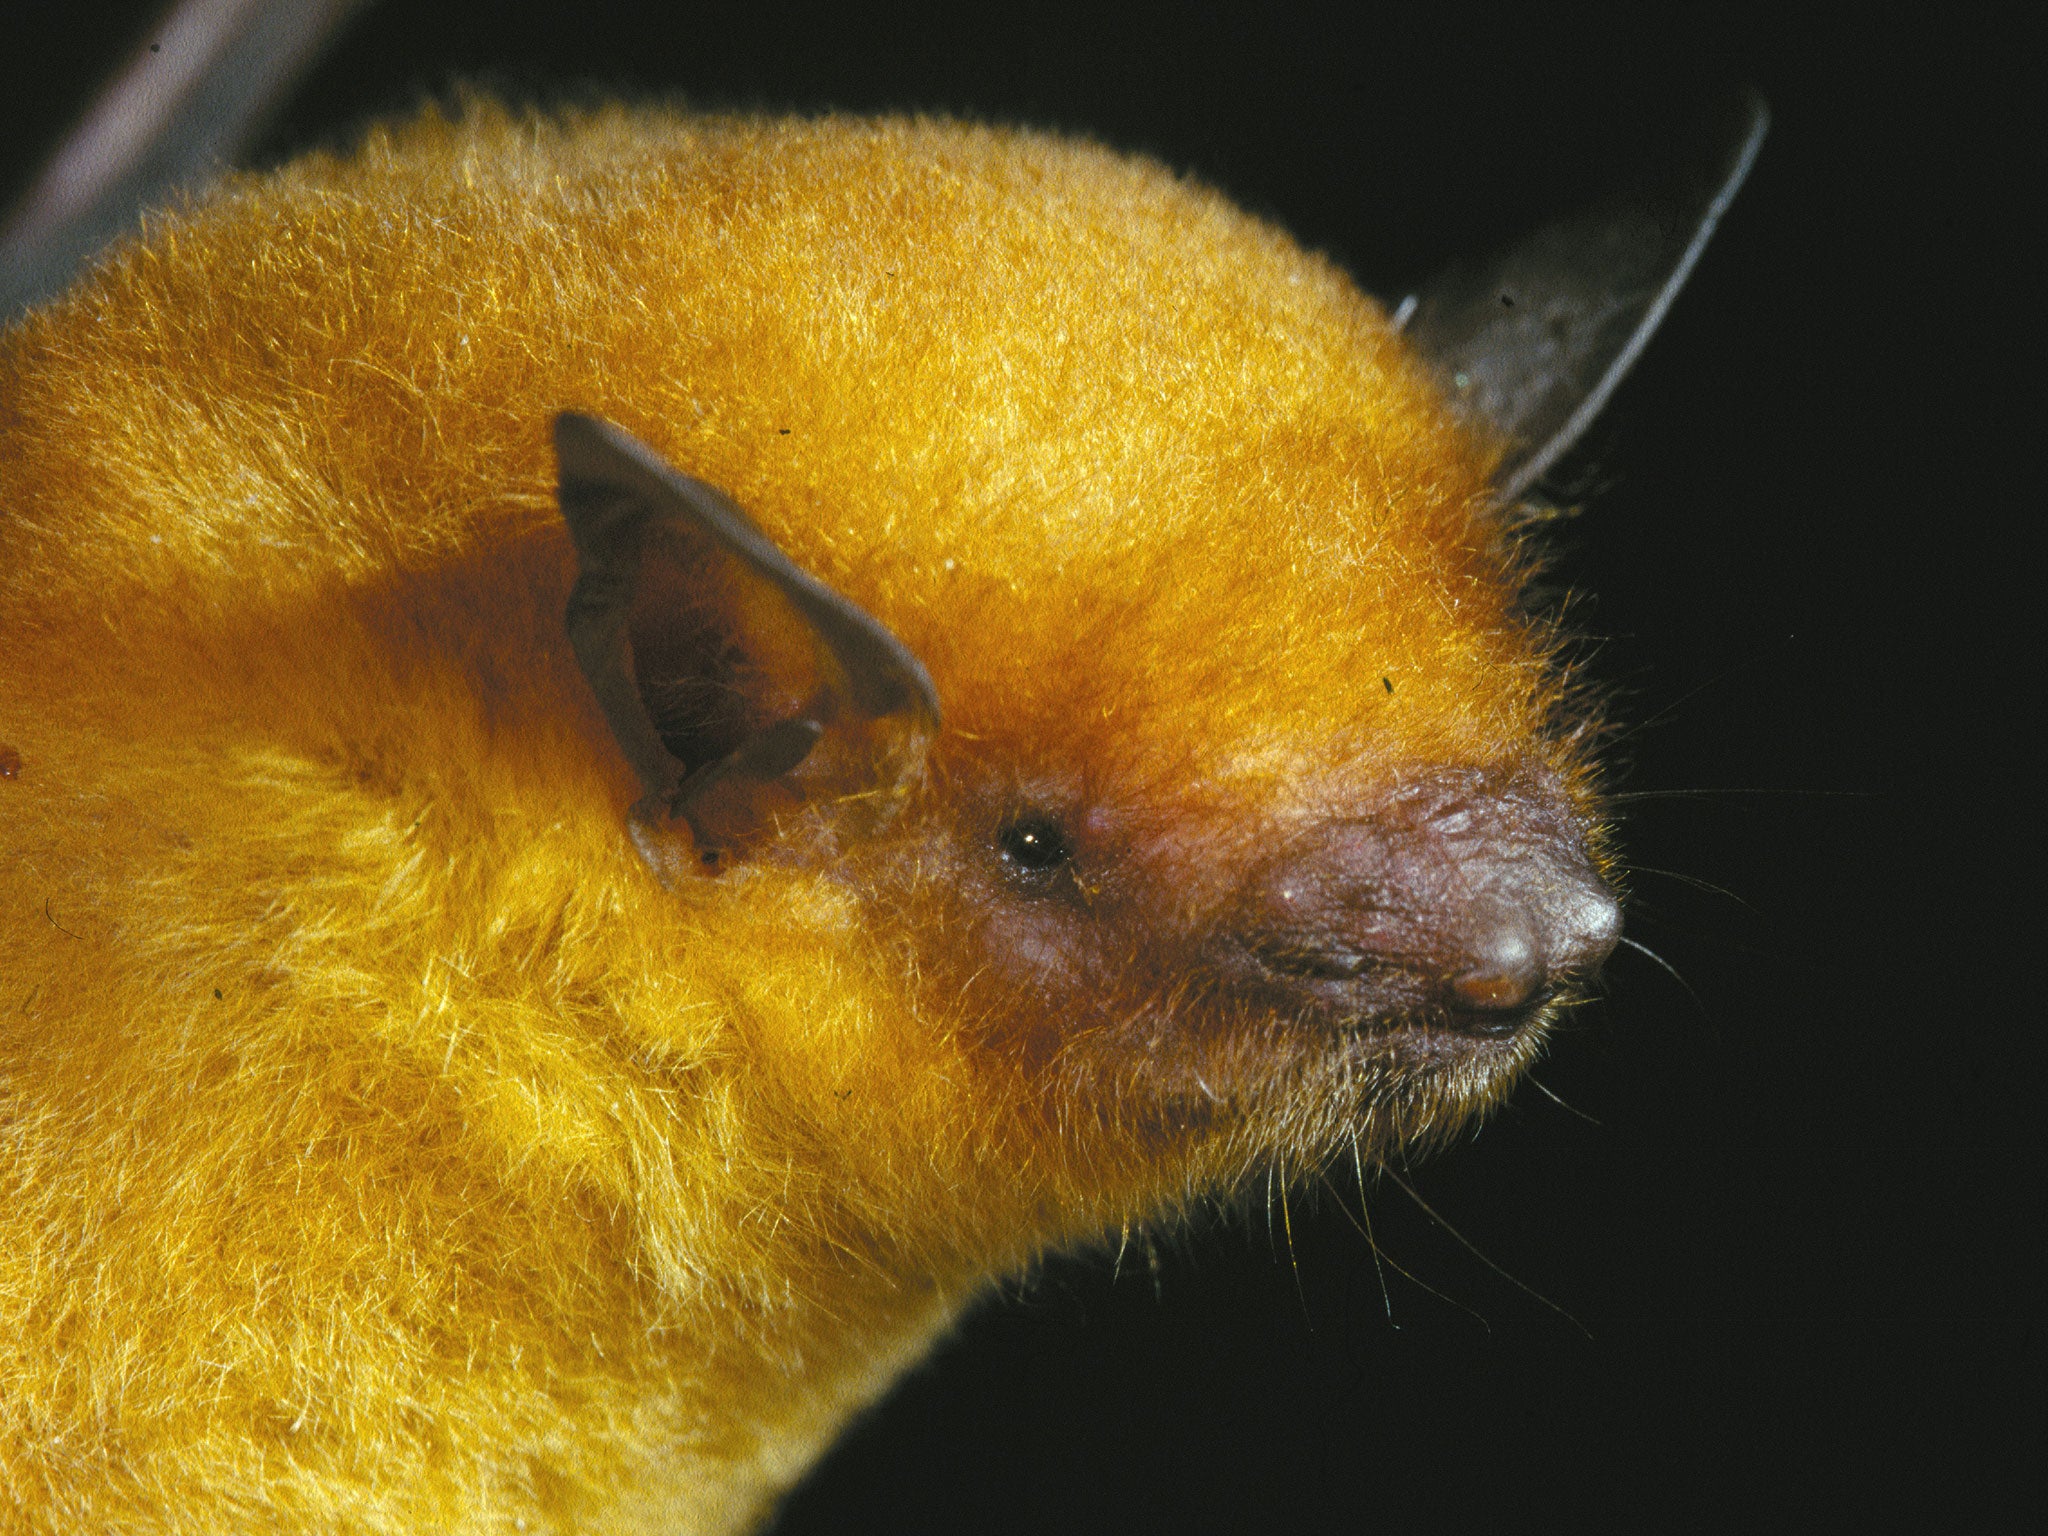 A myotis midastactus bat, which was recently classified as a new species